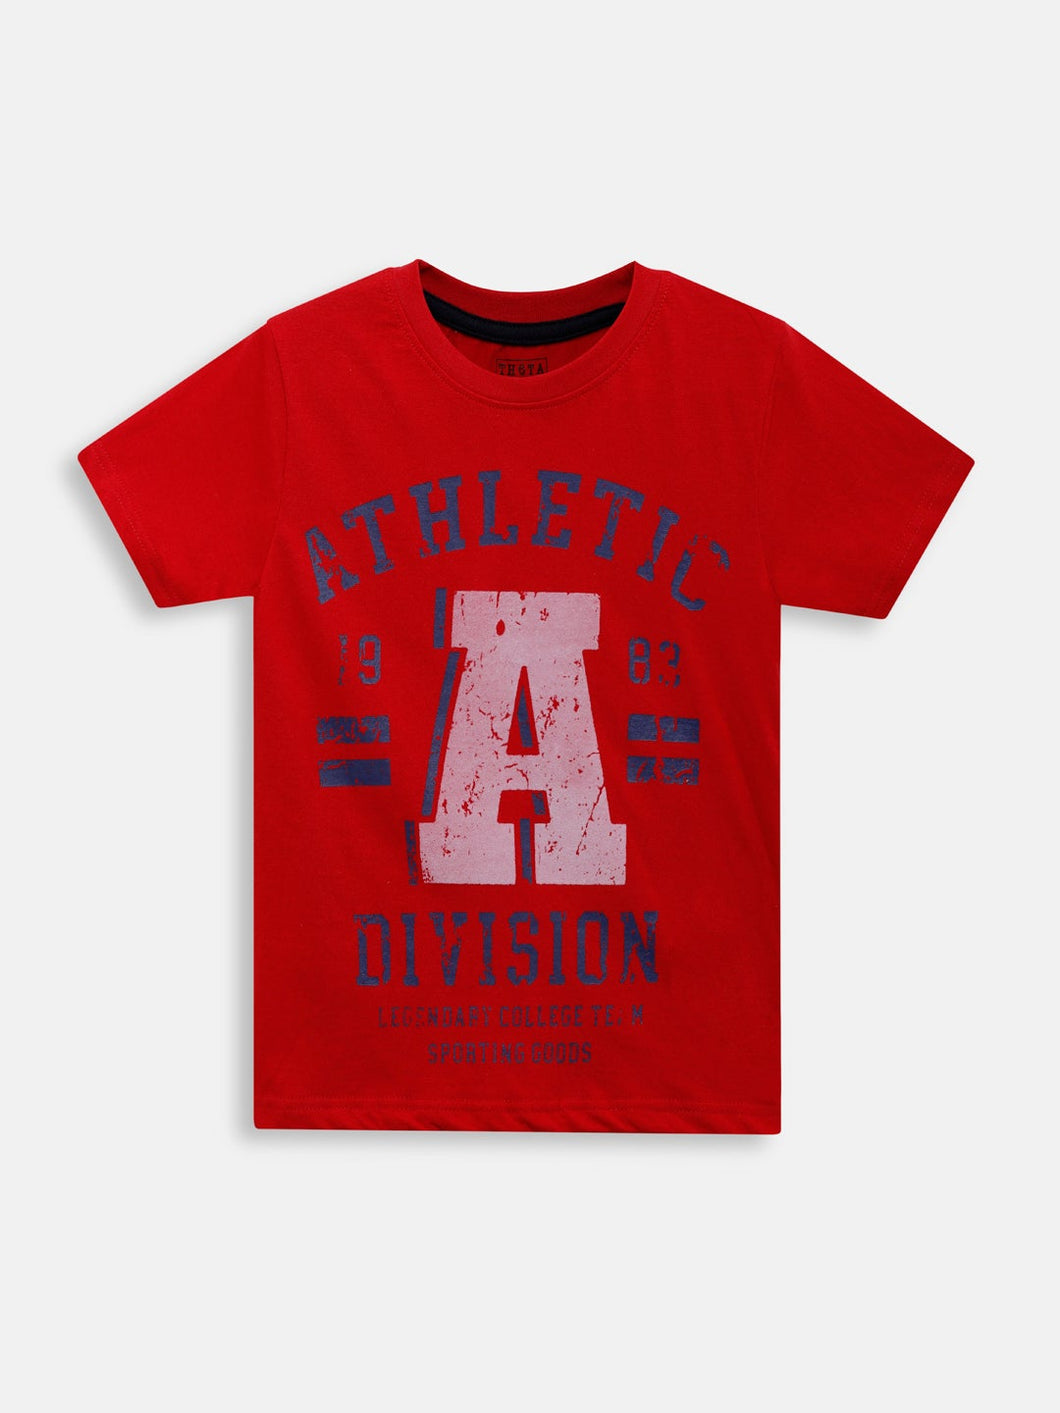 Boys S/S Tee (Style-OTB211101) Red